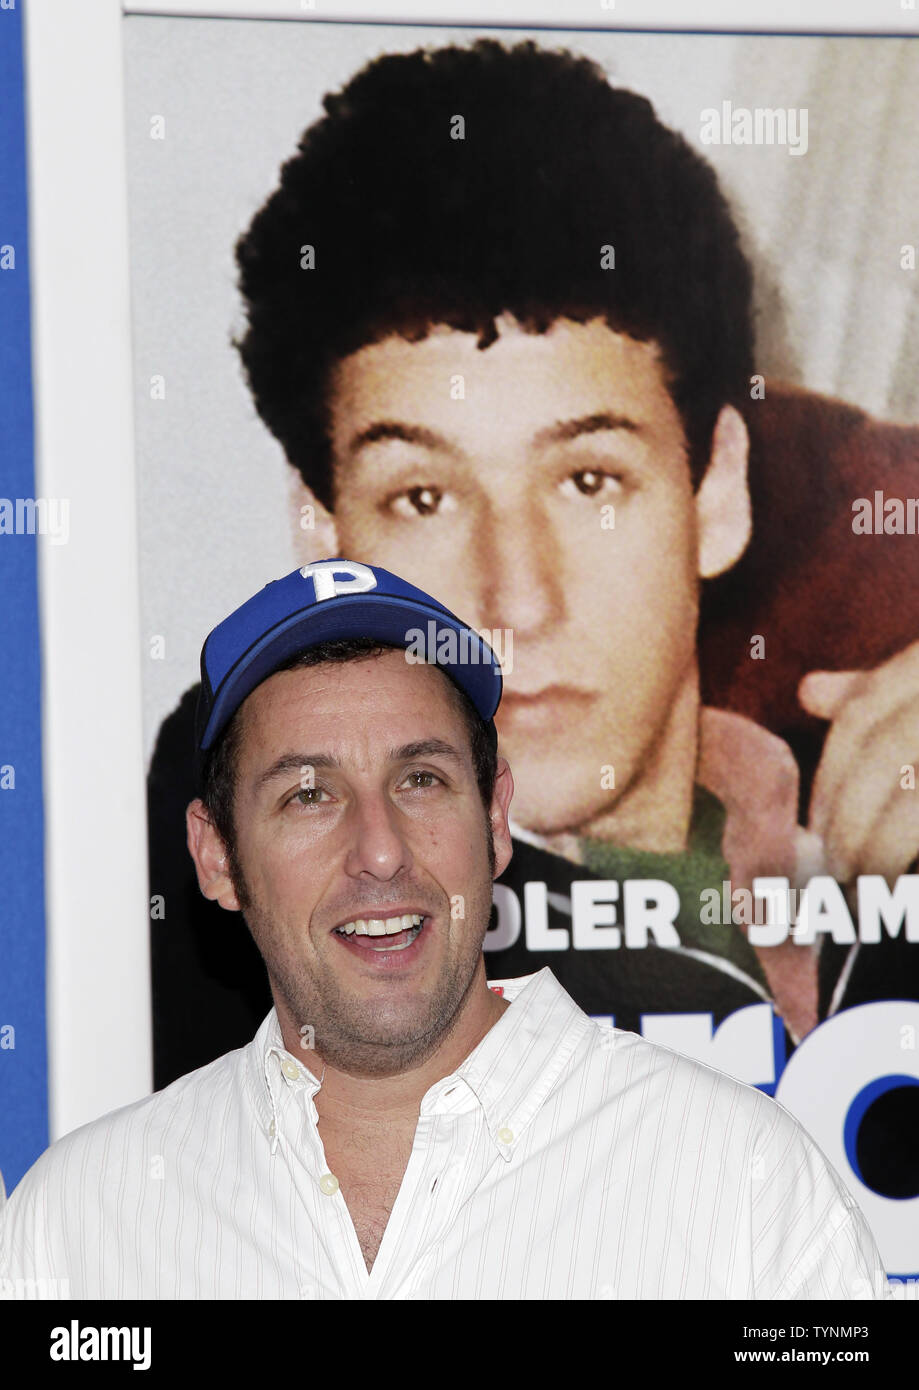 Adam Sandler arrives on the red carpet at a special New York screening of 'Grown Ups 2' at AMC Loews Lincoln Square in New York City on July 10, 2013.    UPI/John Angelillo Stock Photo